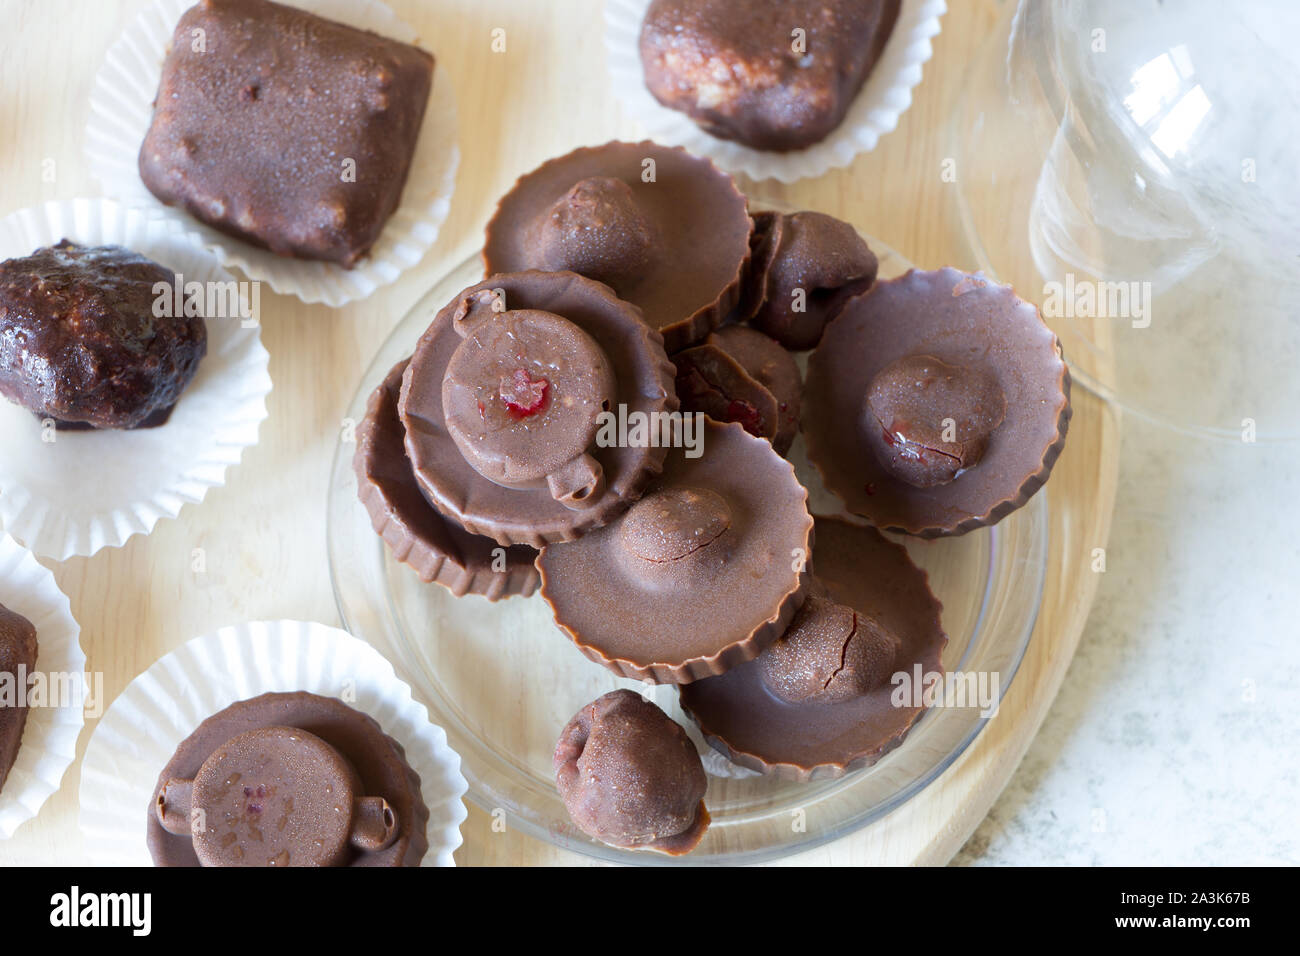 Homemade raw chocolate sweet candies with raspberries inside with droplets of water and raspberry juice on surface. Flat lay. Top view. White wraper. Stock Photo